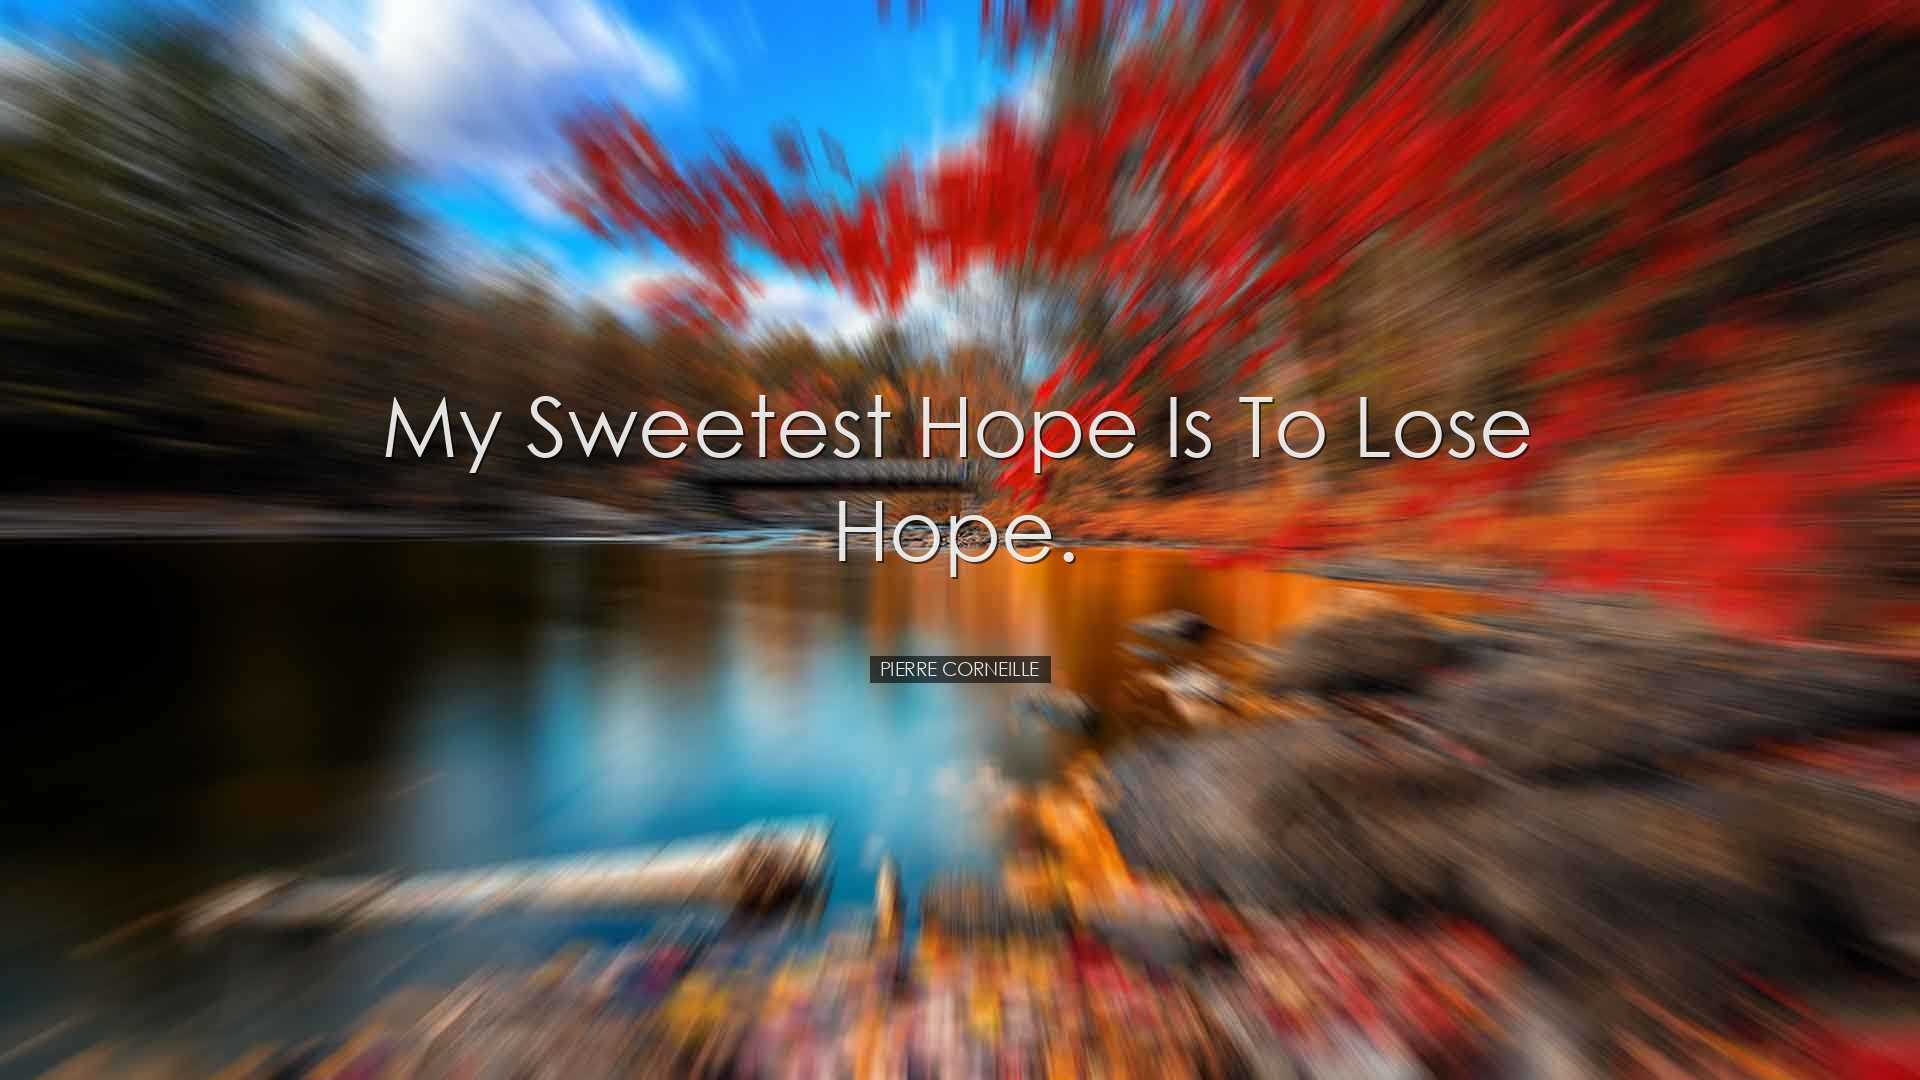 My sweetest hope is to lose hope. - Pierre Corneille